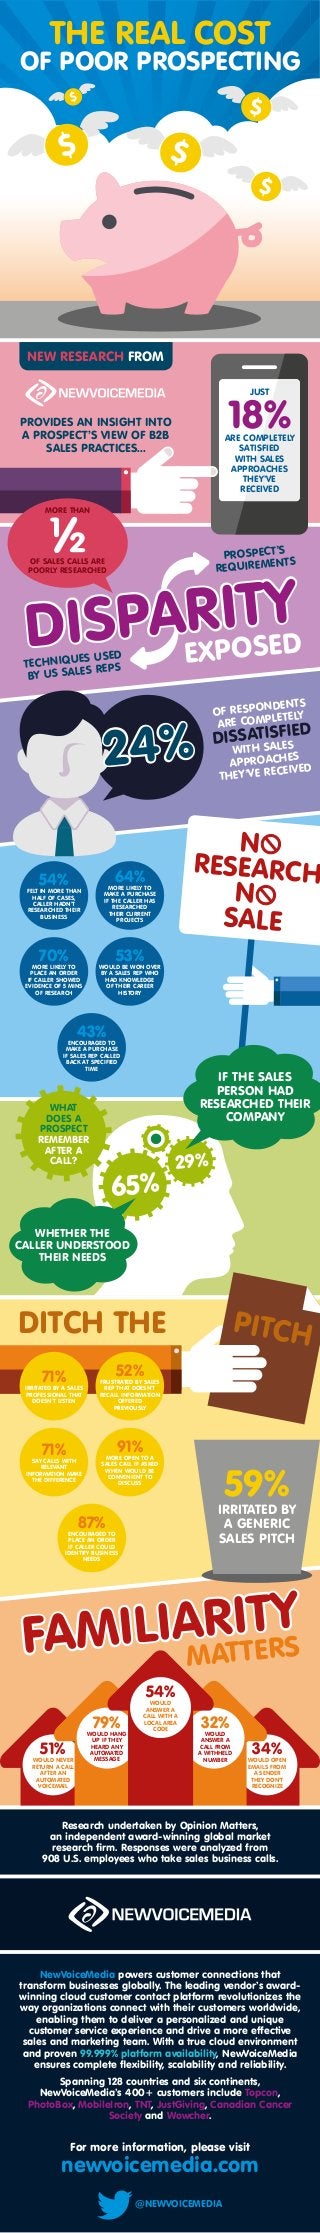 34%WOULD OPEN
EMAILS FROM
A SENDER
THEY DON’T
RECOGNIZE
51%WOULD NEVER
RETURN A CALL
AFTER AN
AUTOMATED
VOICEMAIL
THE REAL COST
OF POOR PROSPECTING
PROSPECT’S
REQUIREMENTS
TECHNIQUES USED
BY US SALES REPS
JUST
18%ARE COMPLETELY
SATISFIED
WITH SALES
APPROACHES
THEY’VE
RECEIVED
PROVIDES AN INSIGHT INTO
A PROSPECT’S VIEW OF B2B
SALES PRACTICES...
NEW RESEARCH FROM
MORE THAN
OF SALES CALLS ARE
POORLY RESEARCHED
EXPOSEDDISPARITY
24%
OF RESPONDENTS
ARE COMPLETELY
DISSATISFIED
WITH SALES
APPROACHES
THEY’VE RECEIVED
DITCH THE
65%
29%
WHAT
DOES A
PROSPECT
REMEMBER
AFTER A
CALL?
54%FELT IN MORE THAN
HALF OF CASES,
CALLER HADN’T
RESEARCHED THEIR
BUSINESS
70%MORE LIKELY TO
PLACE AN ORDER
IF CALLER SHOWED
EVIDENCE OF 5 MINS
OF RESEARCH
64%MORE LIKELY TO
MAKE A PURCHASE
IF THE CALLER HAS
RESEARCHED
THEIR CURRENT
PROJECTS
53%WOULD BE WON OVER
BY A SALES REP WHO
HAD KNOWLEDGE
OF THEIR CAREER
HISTORY
43%ENCOURAGED TO
MAKE A PURCHASE
IF SALES REP CALLED
BACK AT SPECIFIED
TIME
N
RESEARCH
N
SALE
WHETHER THE
CALLER UNDERSTOOD
THEIR NEEDS
IF THE SALES
PERSON HAD
RESEARCHED THEIR
COMPANY
PITCH
71%IRRITATED BY A SALES
PROFESSIONAL THAT
DOESN’T LISTEN
71%SAY CALLS WITH
RELEVANT
INFORMATION MAKE
THE DIFFERENCE
87%ENCOURAGED TO
PLACE AN ORDER
IF CALLER COULD
IDENTIFY BUSINESS
NEEDS
52%FRUSTRATED BY SALES
REP THAT DOESN’T
RECALL INFORMATION
OFFERED
PREVIOUSLY
91%MORE OPEN TO A
SALES CALL IF ASKED
WHEN WOULD BE
CONVENIENT TO
DISCUSS
59%IRRITATED BY
A GENERIC
SALES PITCH
MATTERSFAMILIARITY
NewVoiceMedia powers customer connections that
transform businesses globally. The leading vendor’s award-
winning cloud customer contact platform revolutionizes the
way organizations connect with their customers worldwide,
enabling them to deliver a personalized and unique
customer service experience and drive a more effective
sales and marketing team. With a true cloud environment
and proven 99.999% platform availability, NewVoiceMedia
ensures complete flexibility, scalability and reliability.
Spanning 128 countries and six continents,
NewVoiceMedia’s 400+ customers include Topcon,
PhotoBox, MobileIron, TNT, JustGiving, Canadian Cancer
Society and Wowcher.
Research undertaken by Opinion Matters,
an independent award-winning global market
research firm. Responses were analyzed from
908 U.S. employees who take sales business calls.
For more information, please visit
newvoicemedia.com
@NEWVOICEMEDIA
54%WOULD
ANSWER A
CALL WITH A
LOCAL AREA
CODE
32%WOULD
ANSWER A
CALL FROM
A WITHHELD
NUMBER
79%WOULD HANG
UP IF THEY
HEARD ANY
AUTOMATED
MESSAGE
 